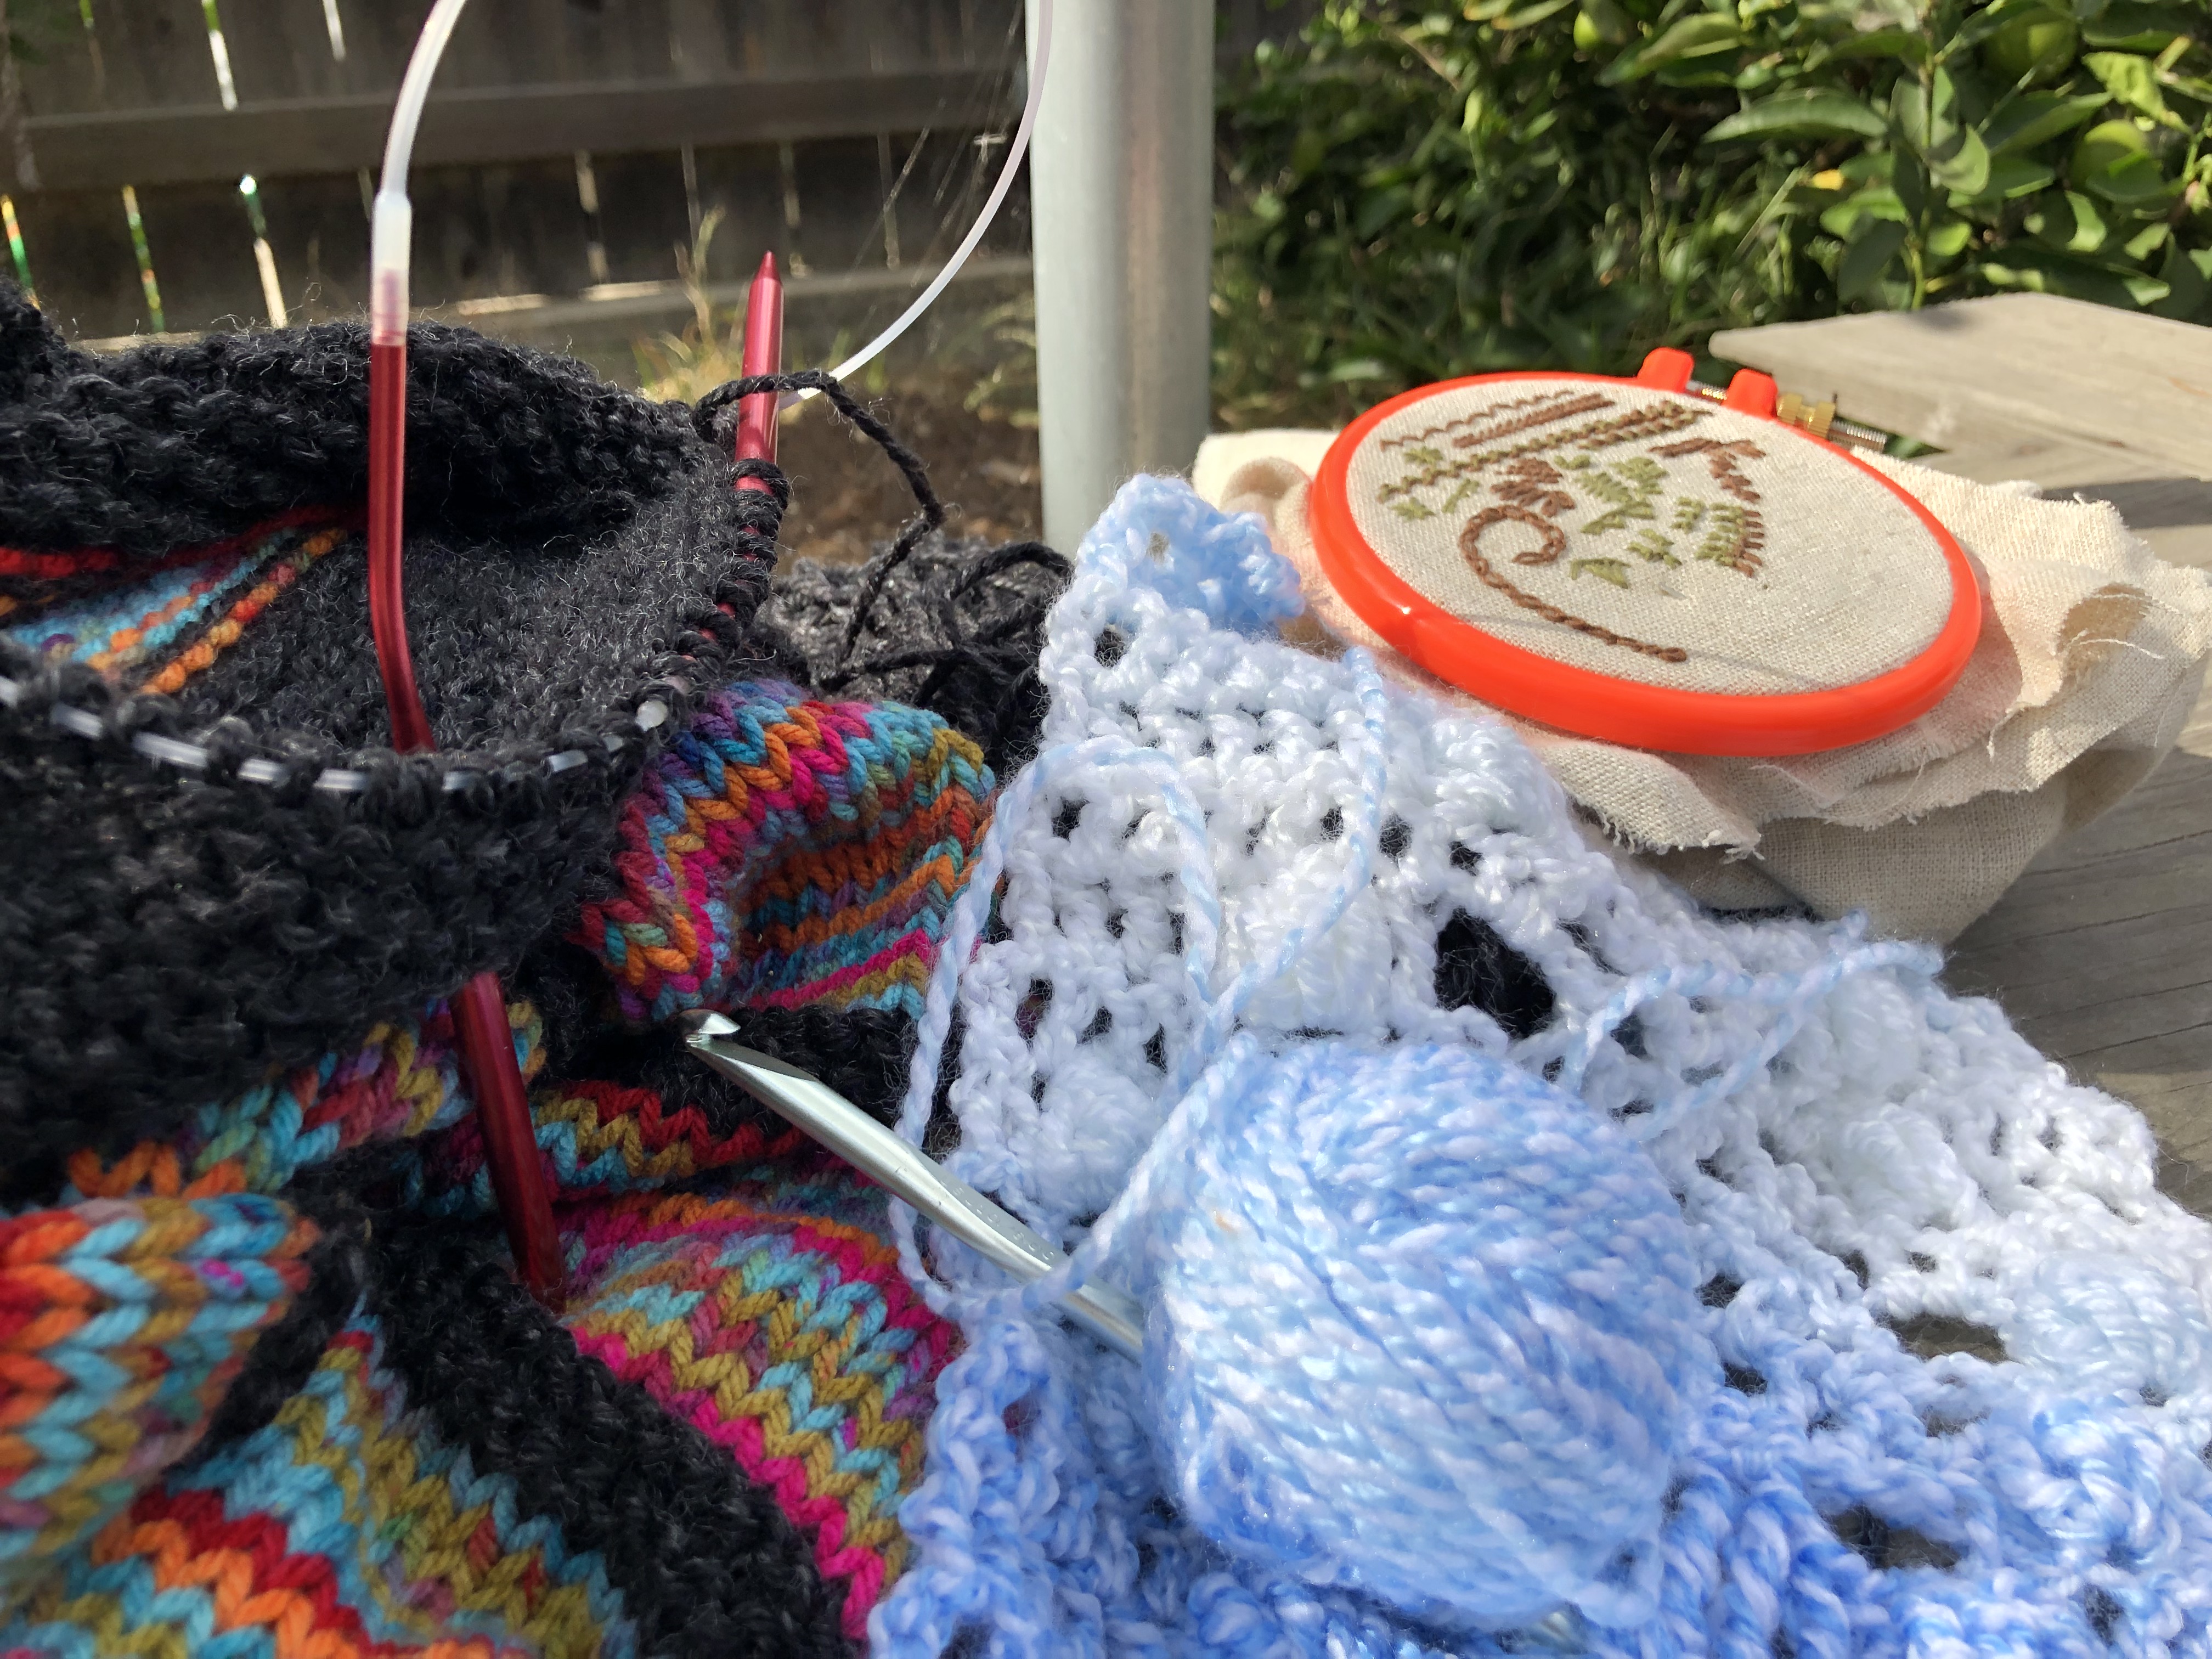 Yarn, knitting needles, crochet hook and embroidery hoop on a bench in a garden.